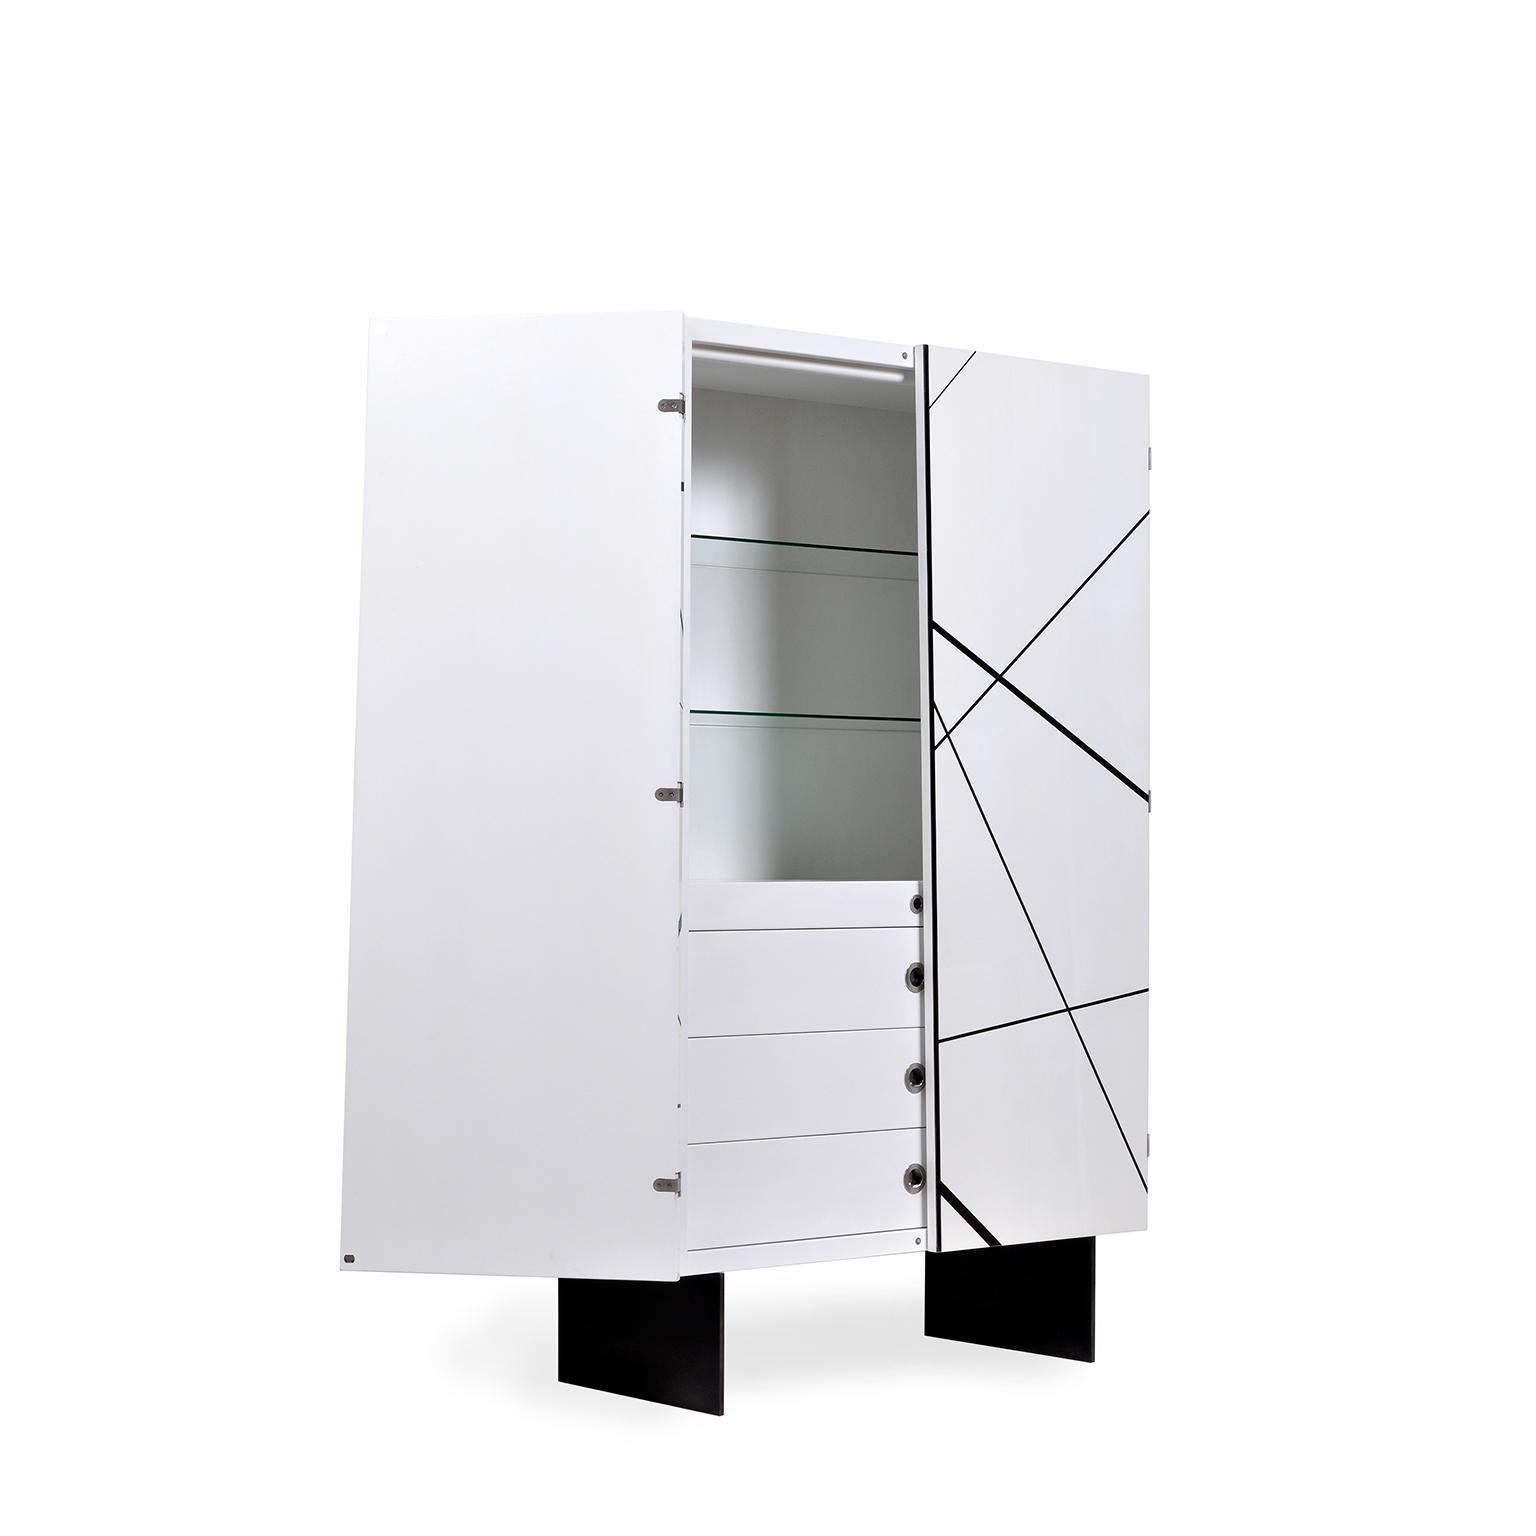 Modern Art in Modern Furniture. The Ray Cabinet in high gloss white lacquer and genuine ebony inlay makes a striking statement. The inlay pattern continues around the front corners to the sides of the piece in uninterrupted lines until the doors